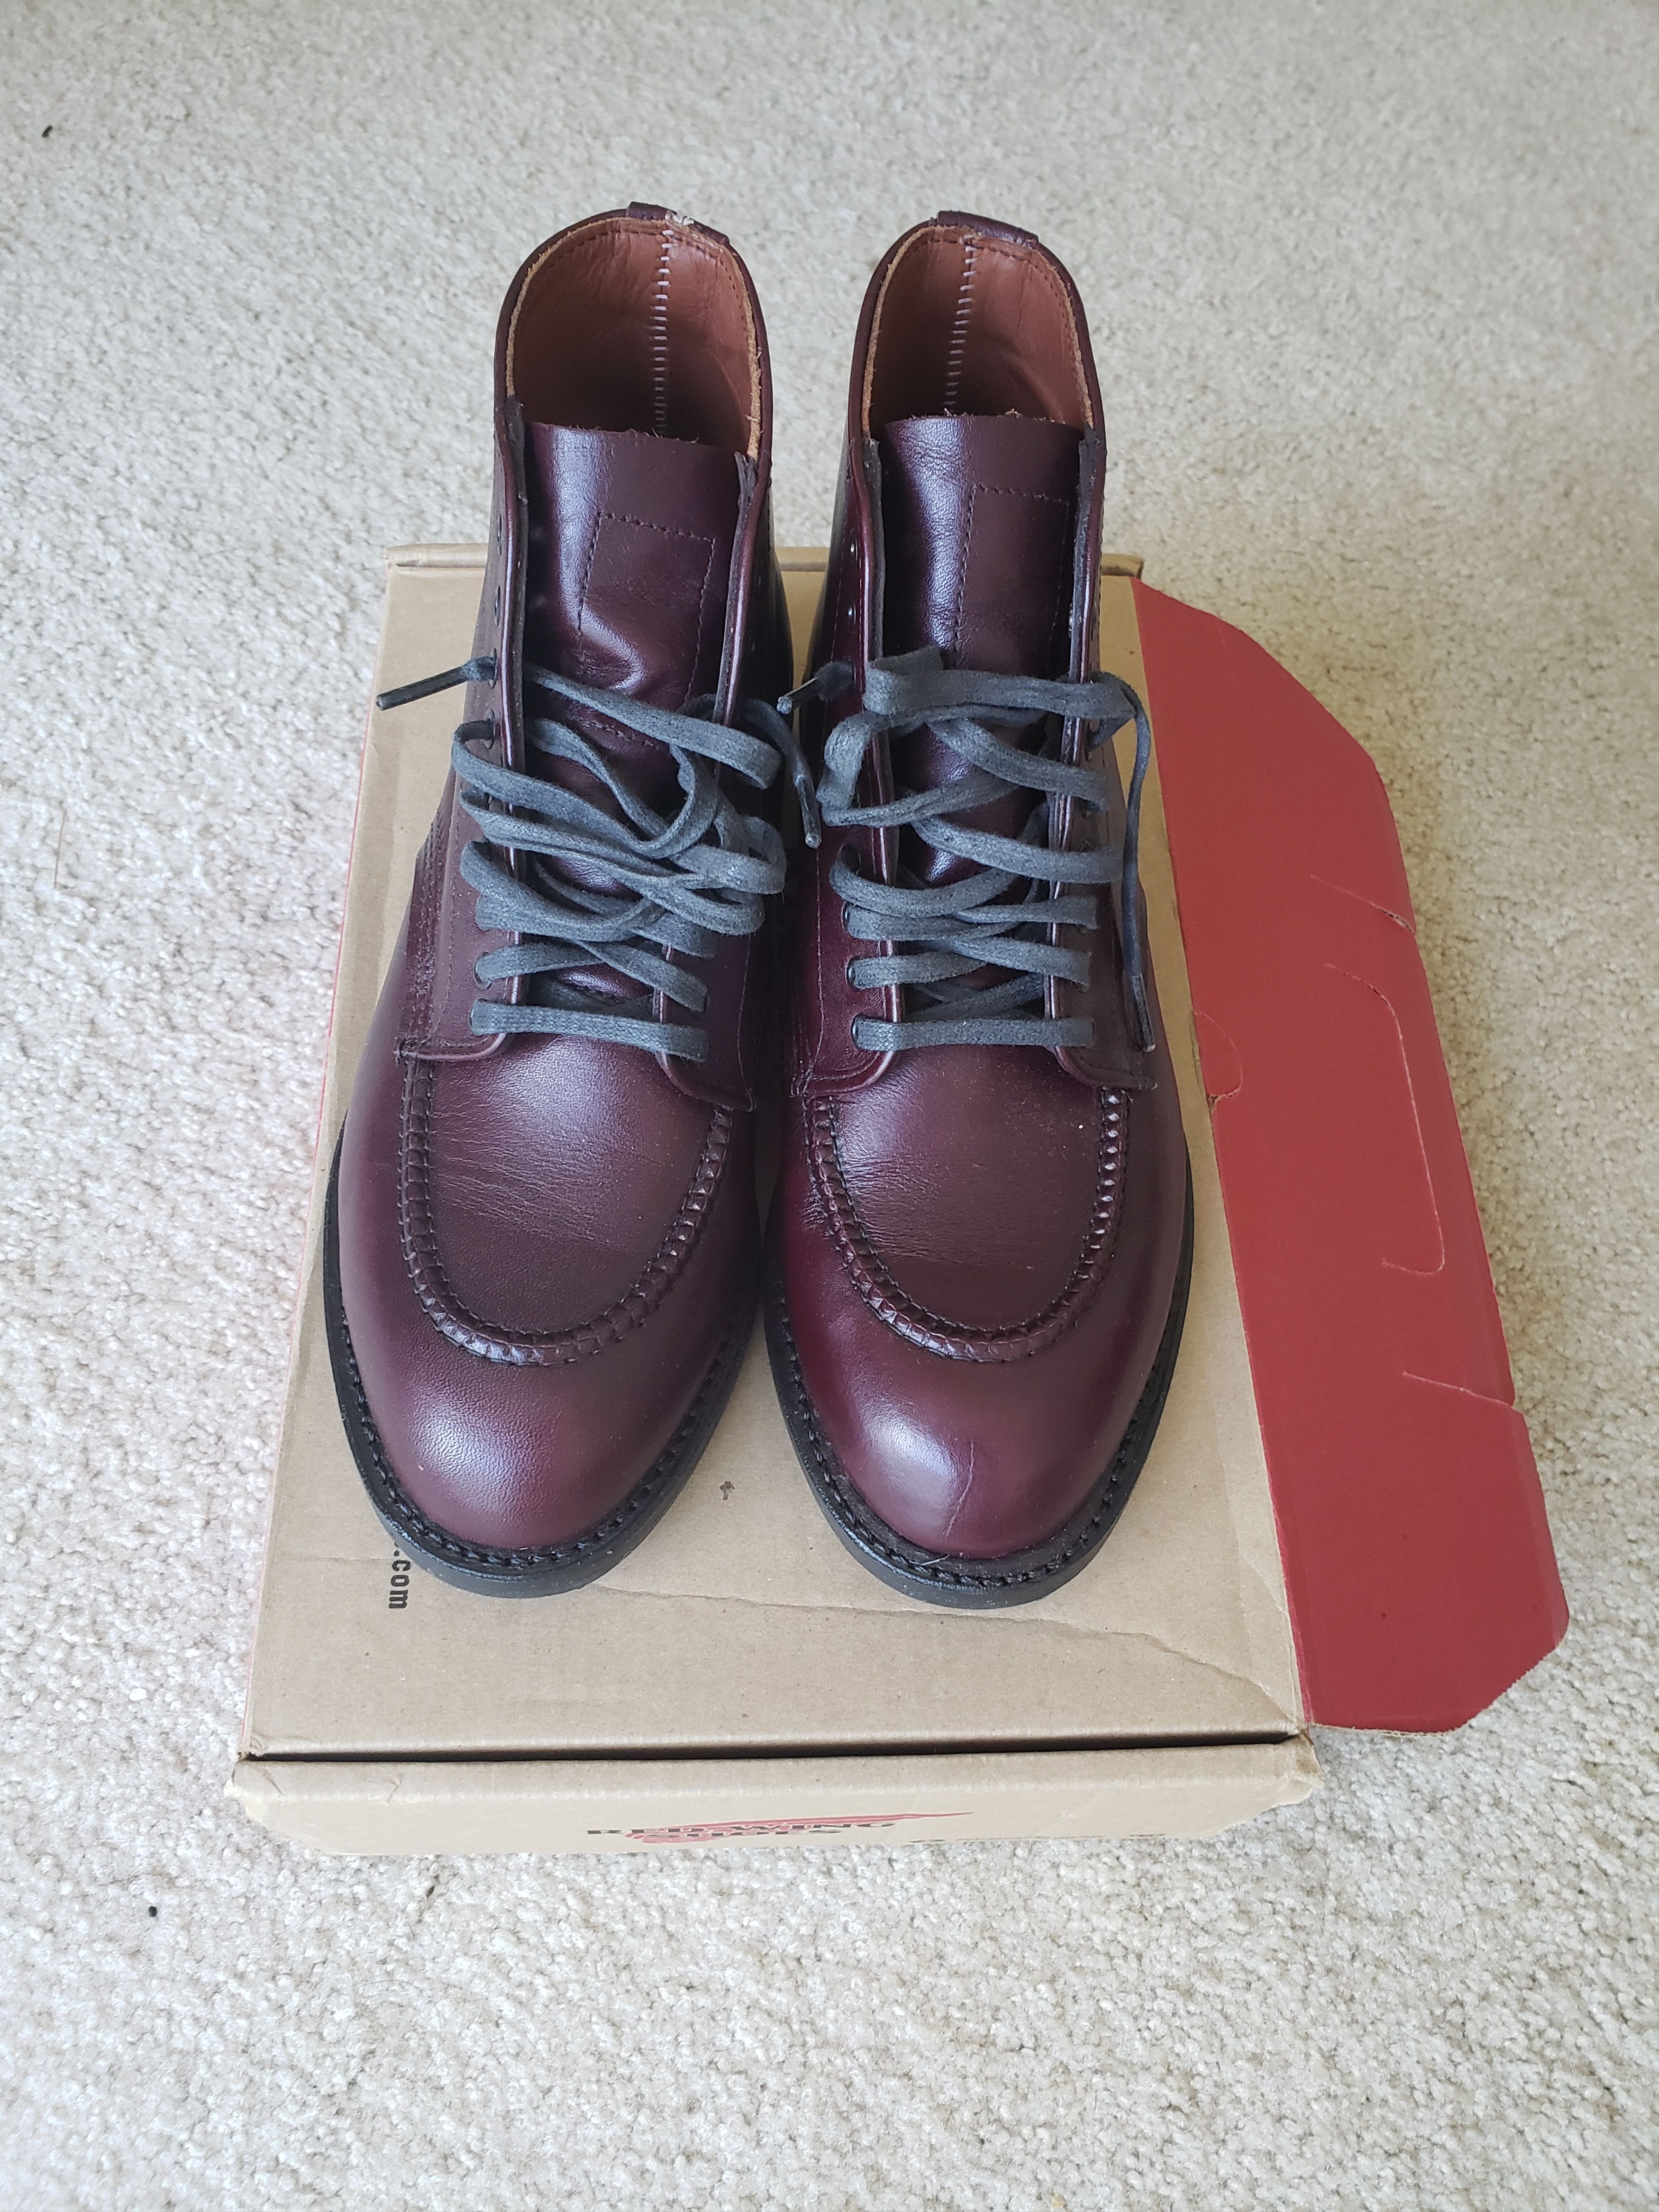 Red Wing 2nd Girard 9091 Cherry Brown | Grailed